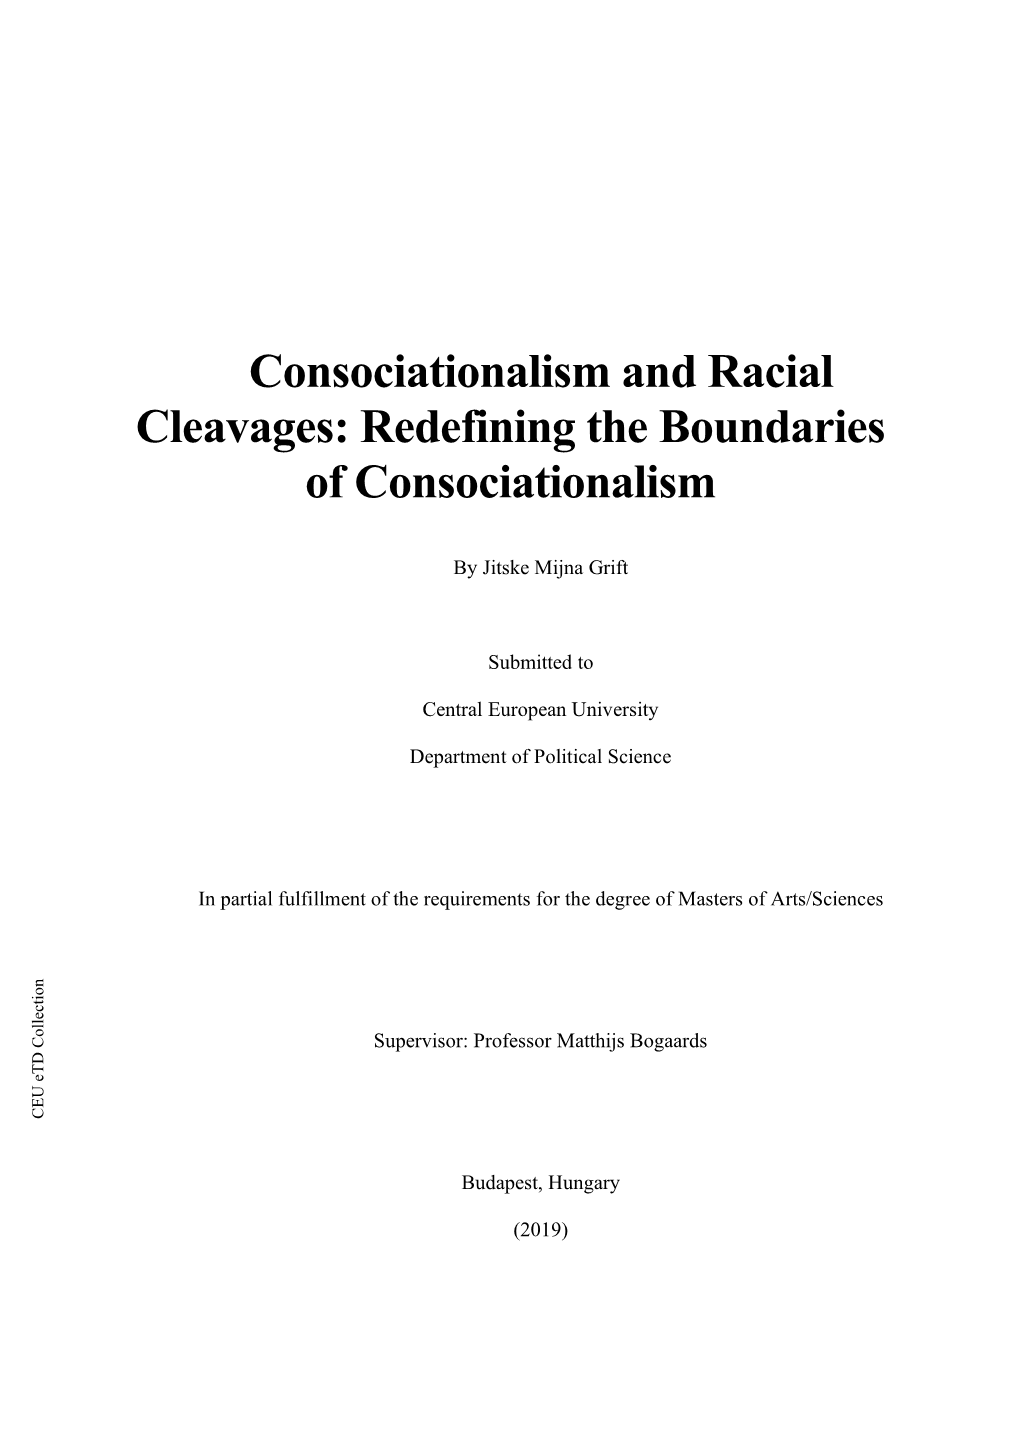 Consociationalism and Racial Cleavages: Redefining the Boundaries of Consociationalism